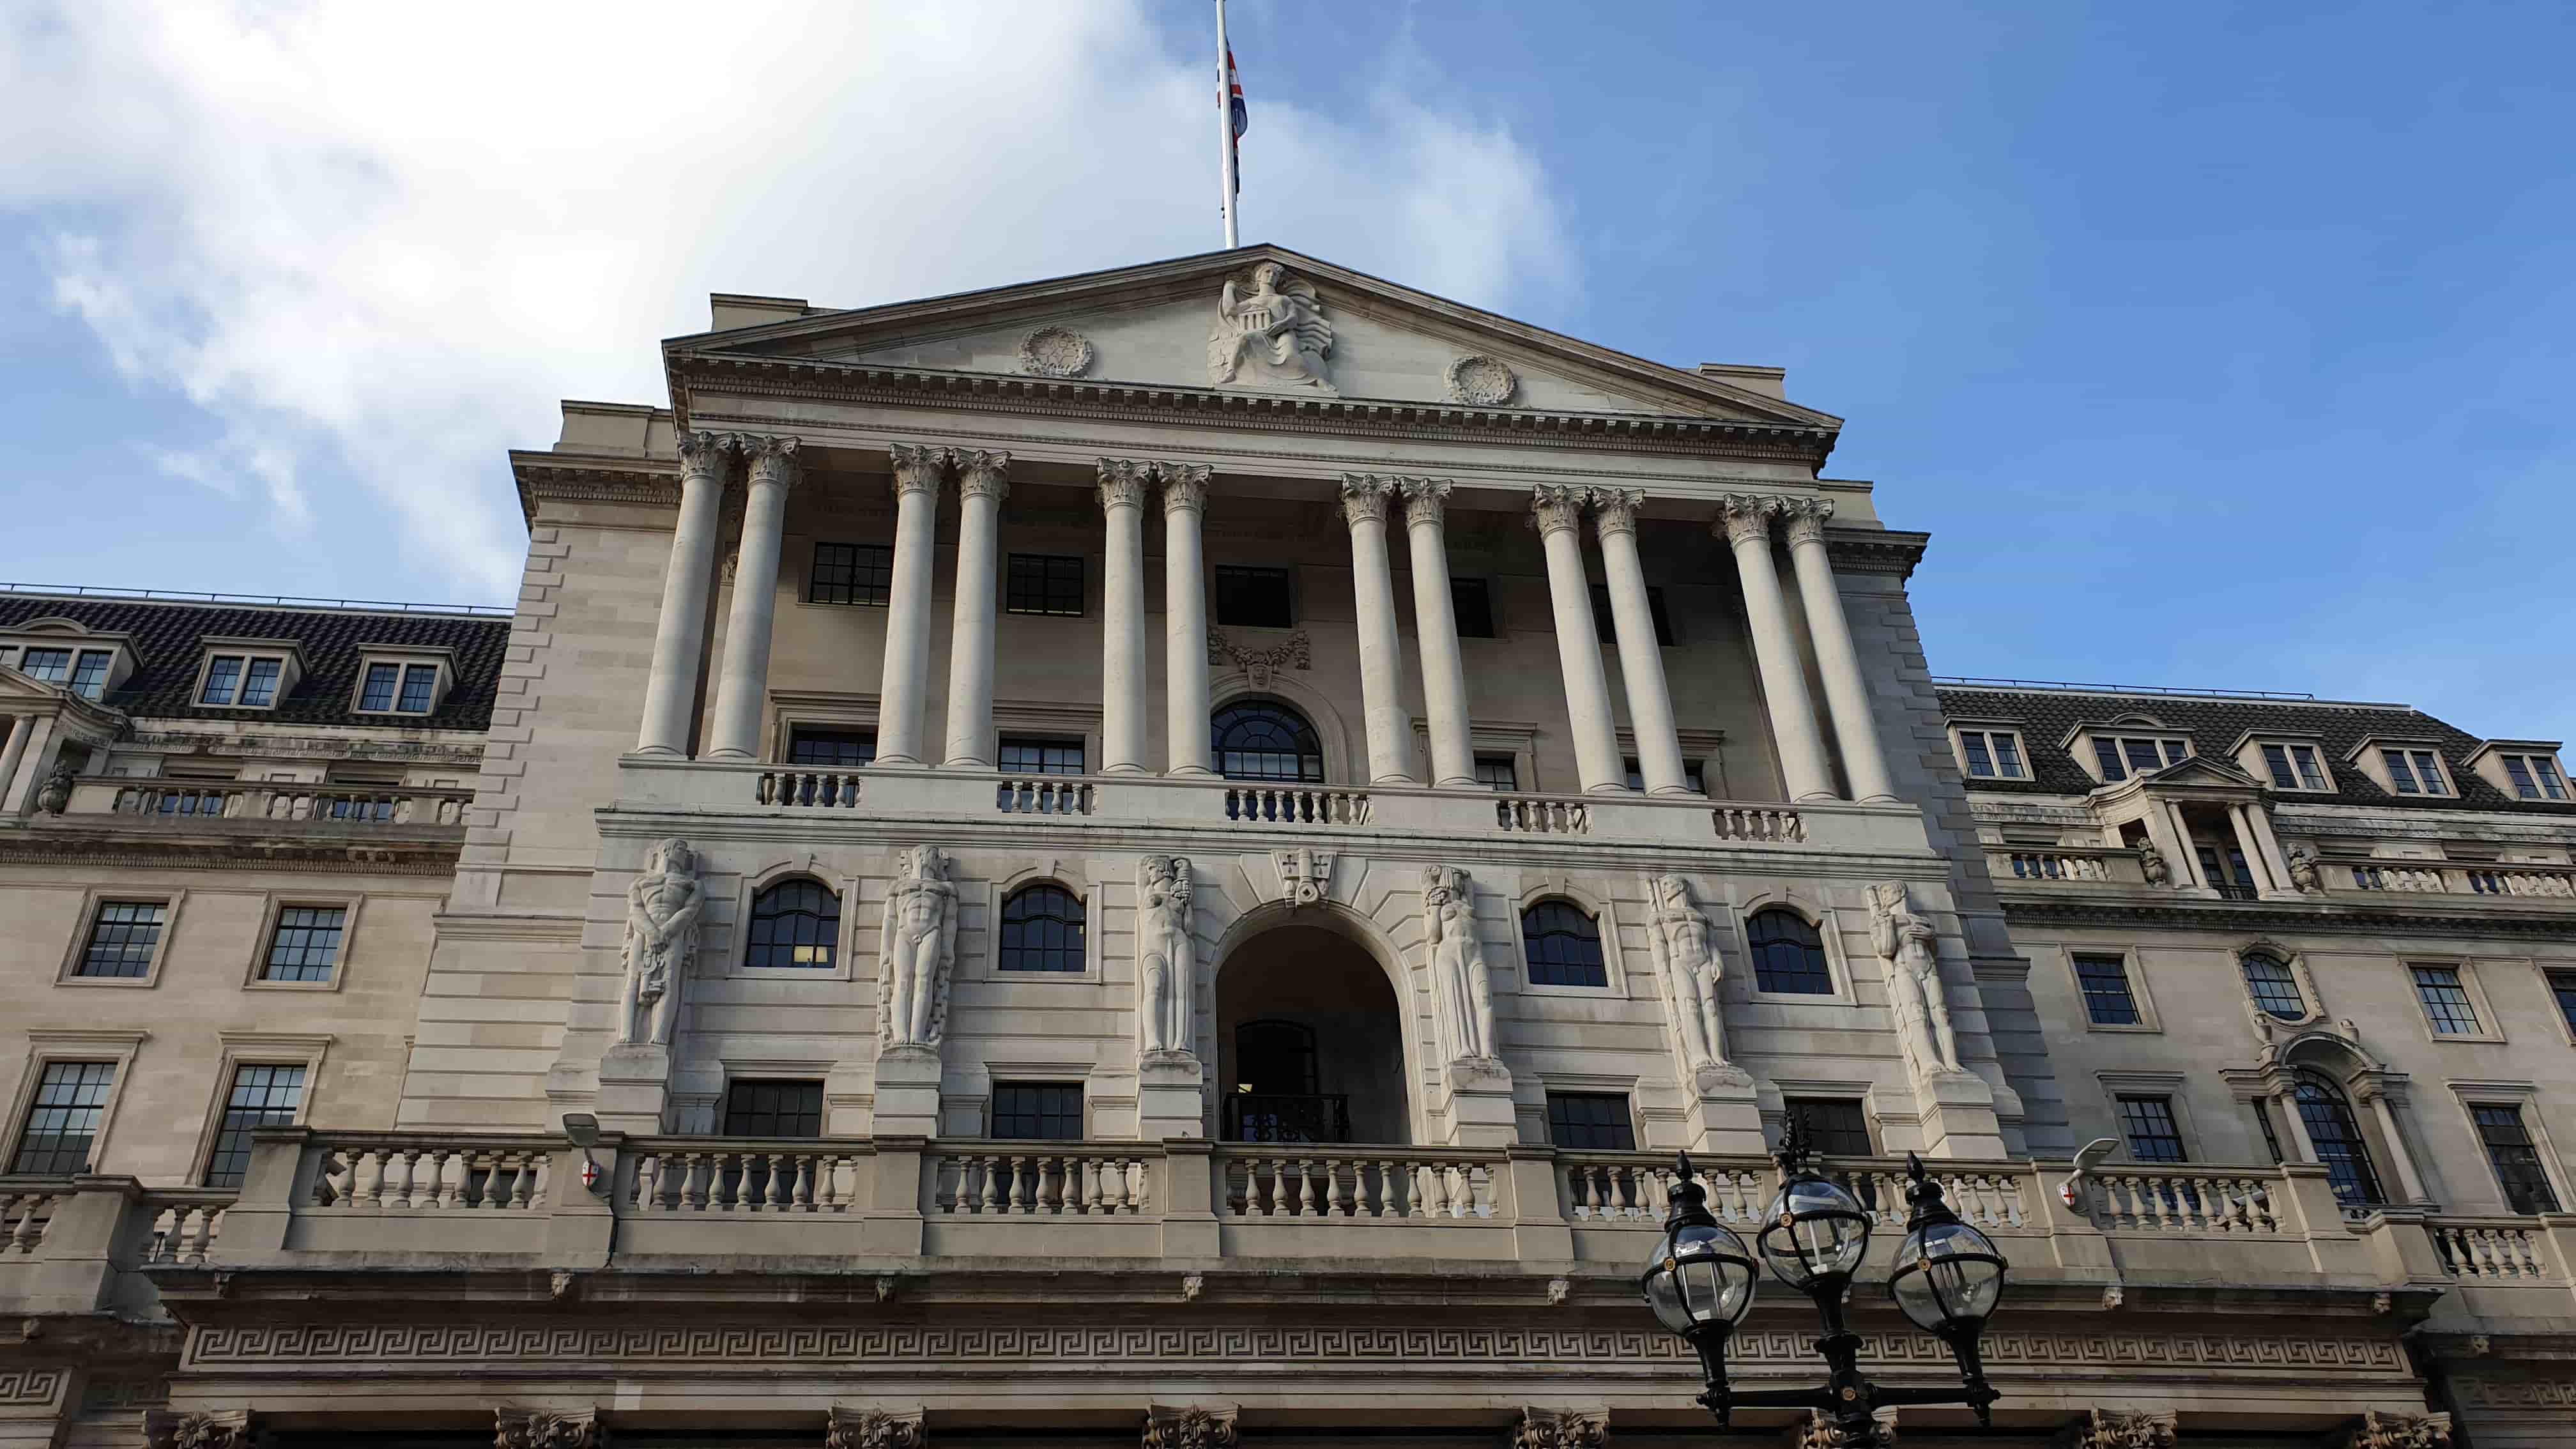 UK: Inflation Rate Falls but Concerns Remain